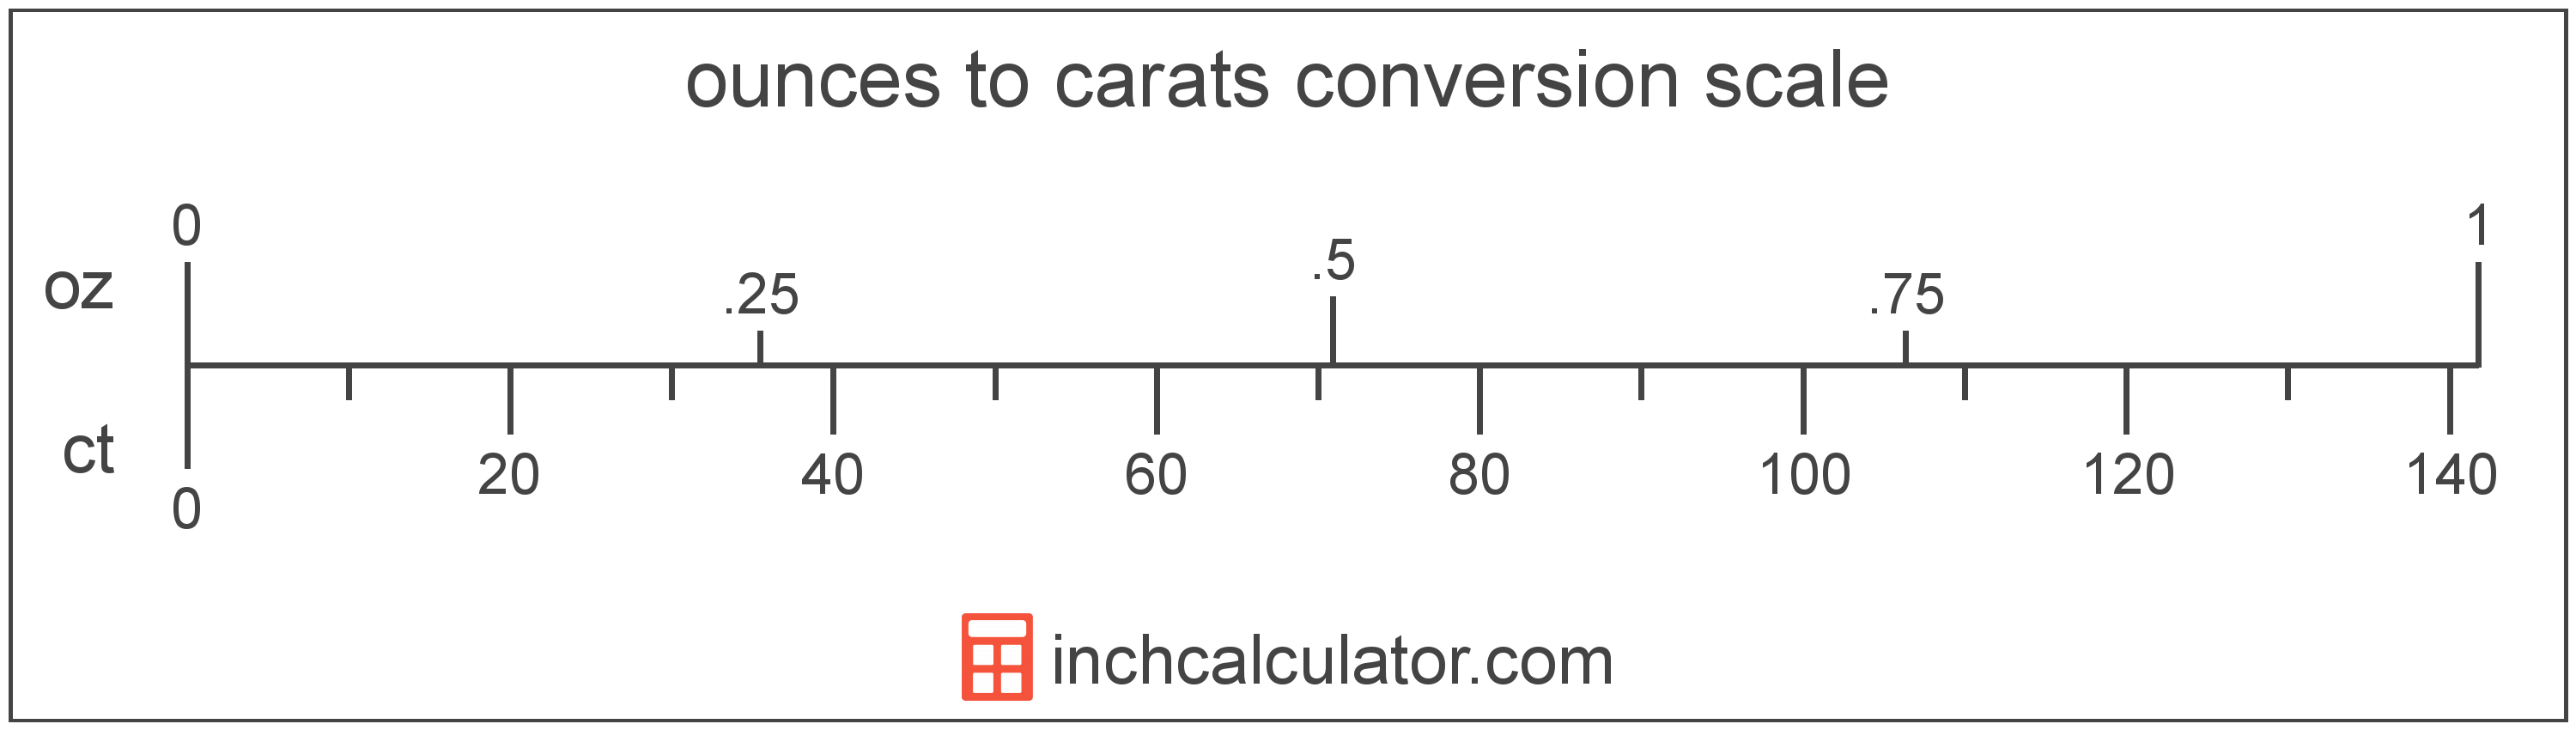 Ounces to Carats Conversion (oz to ct) - Inch Calculator